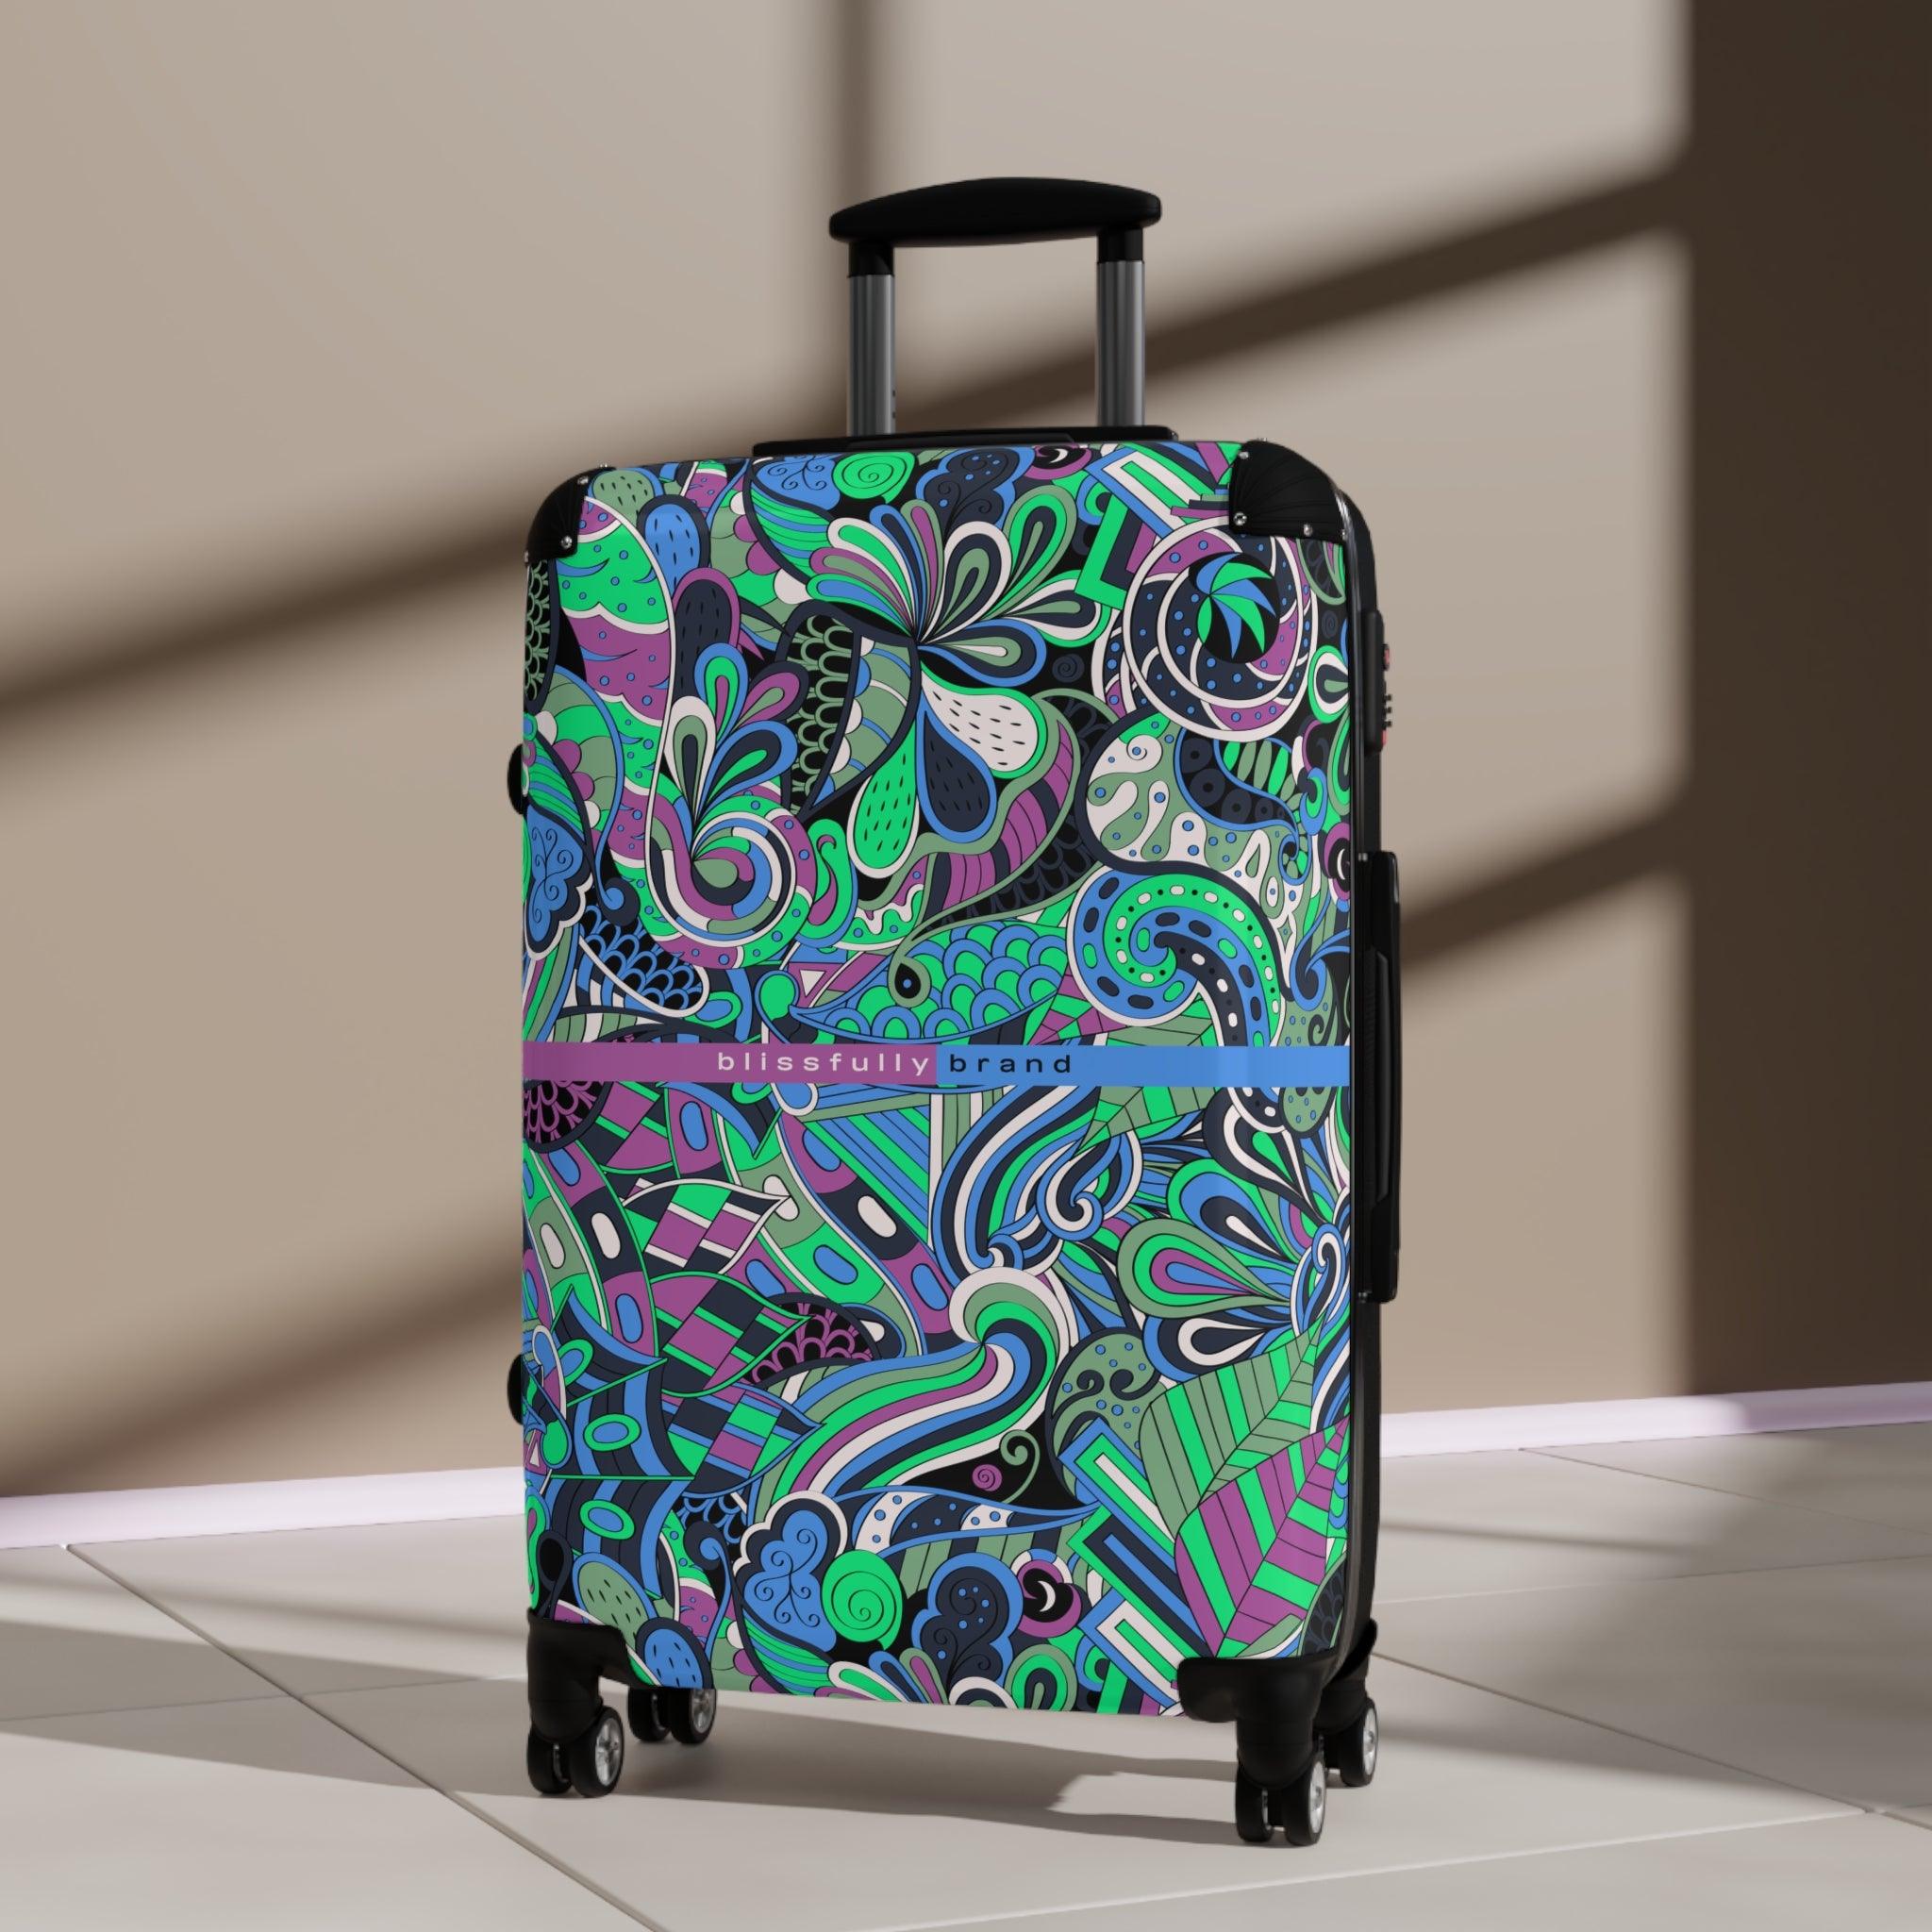 Nela Luggage Collection - Abstract Kaleidoscope Paisley Floral Print Psychedelic Retro Swirls Funky Multicolor Check in Carry On Roller 360 Hard Shell Unique Retro Vibrant Bold Eclectic Boho Chic Blue Green